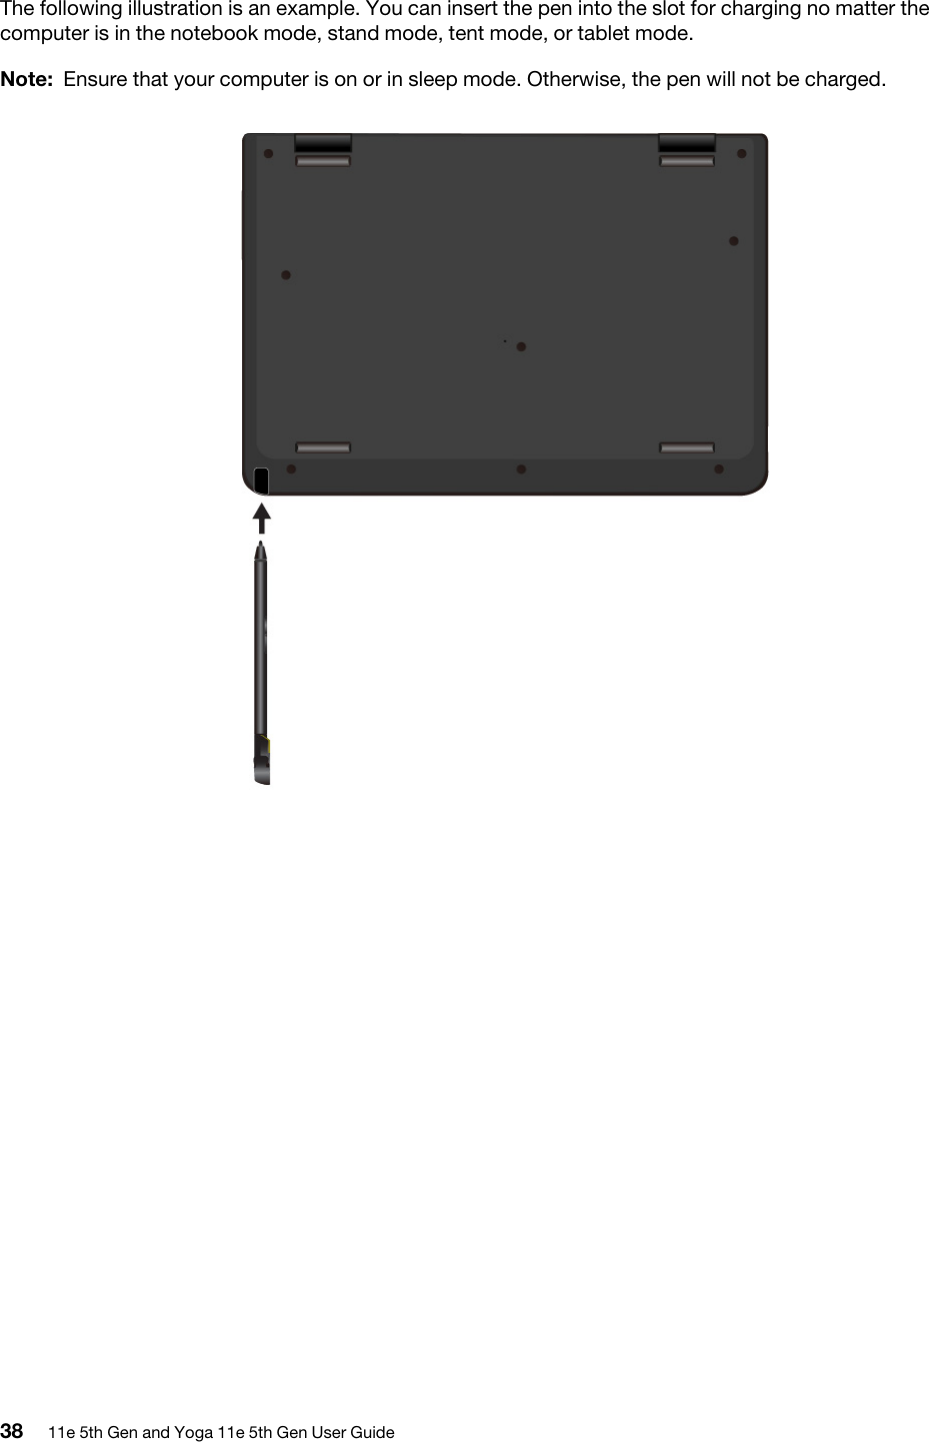 The following illustration is an example. You can insert the pen into the slot for charging no matter the computer is in the notebook mode, stand mode, tent mode, or tablet mode. Note: Ensure that your computer is on or in sleep mode. Otherwise, the pen will not be charged.38 11e 5th Gen and Yoga 11e 5th Gen User Guide